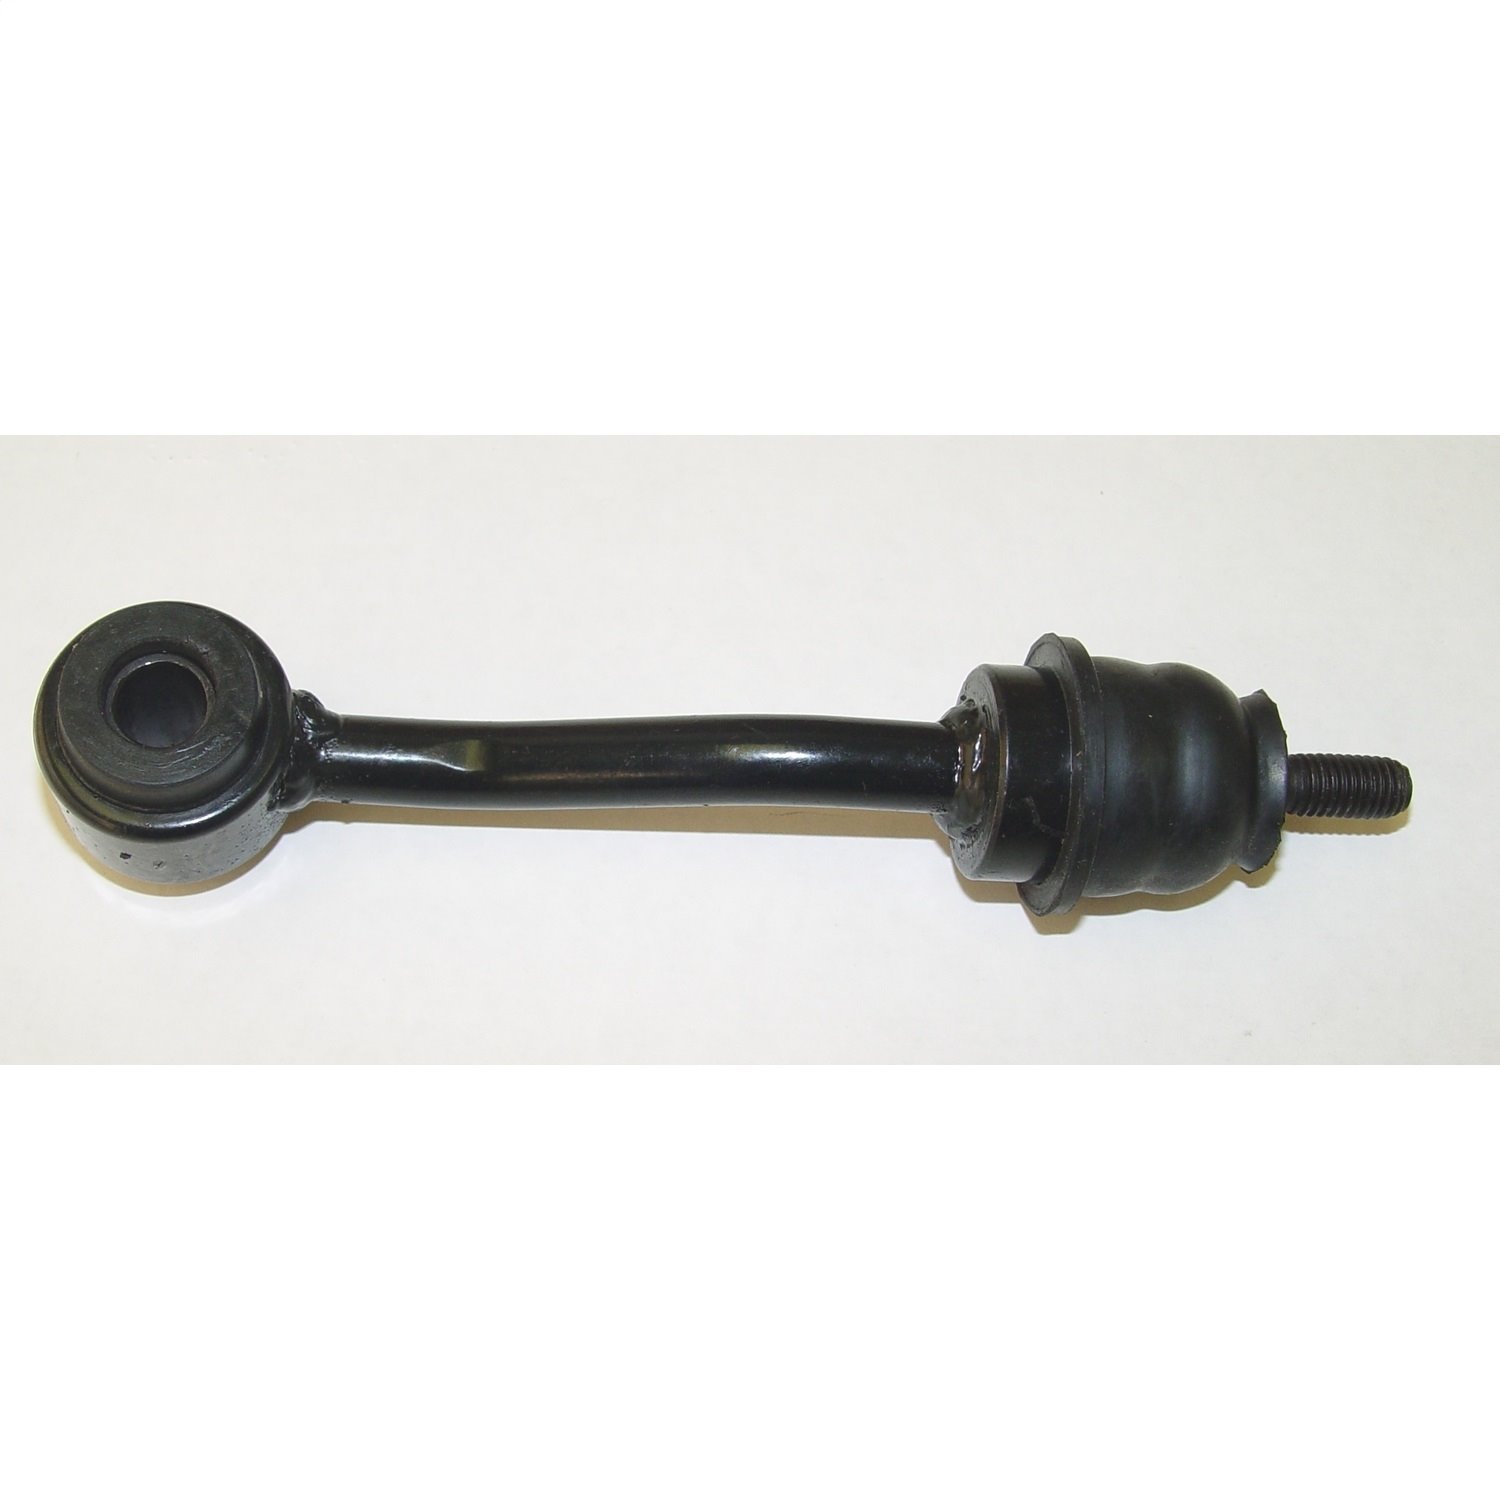 Replacement front sway bar end link from Omix-ADA,